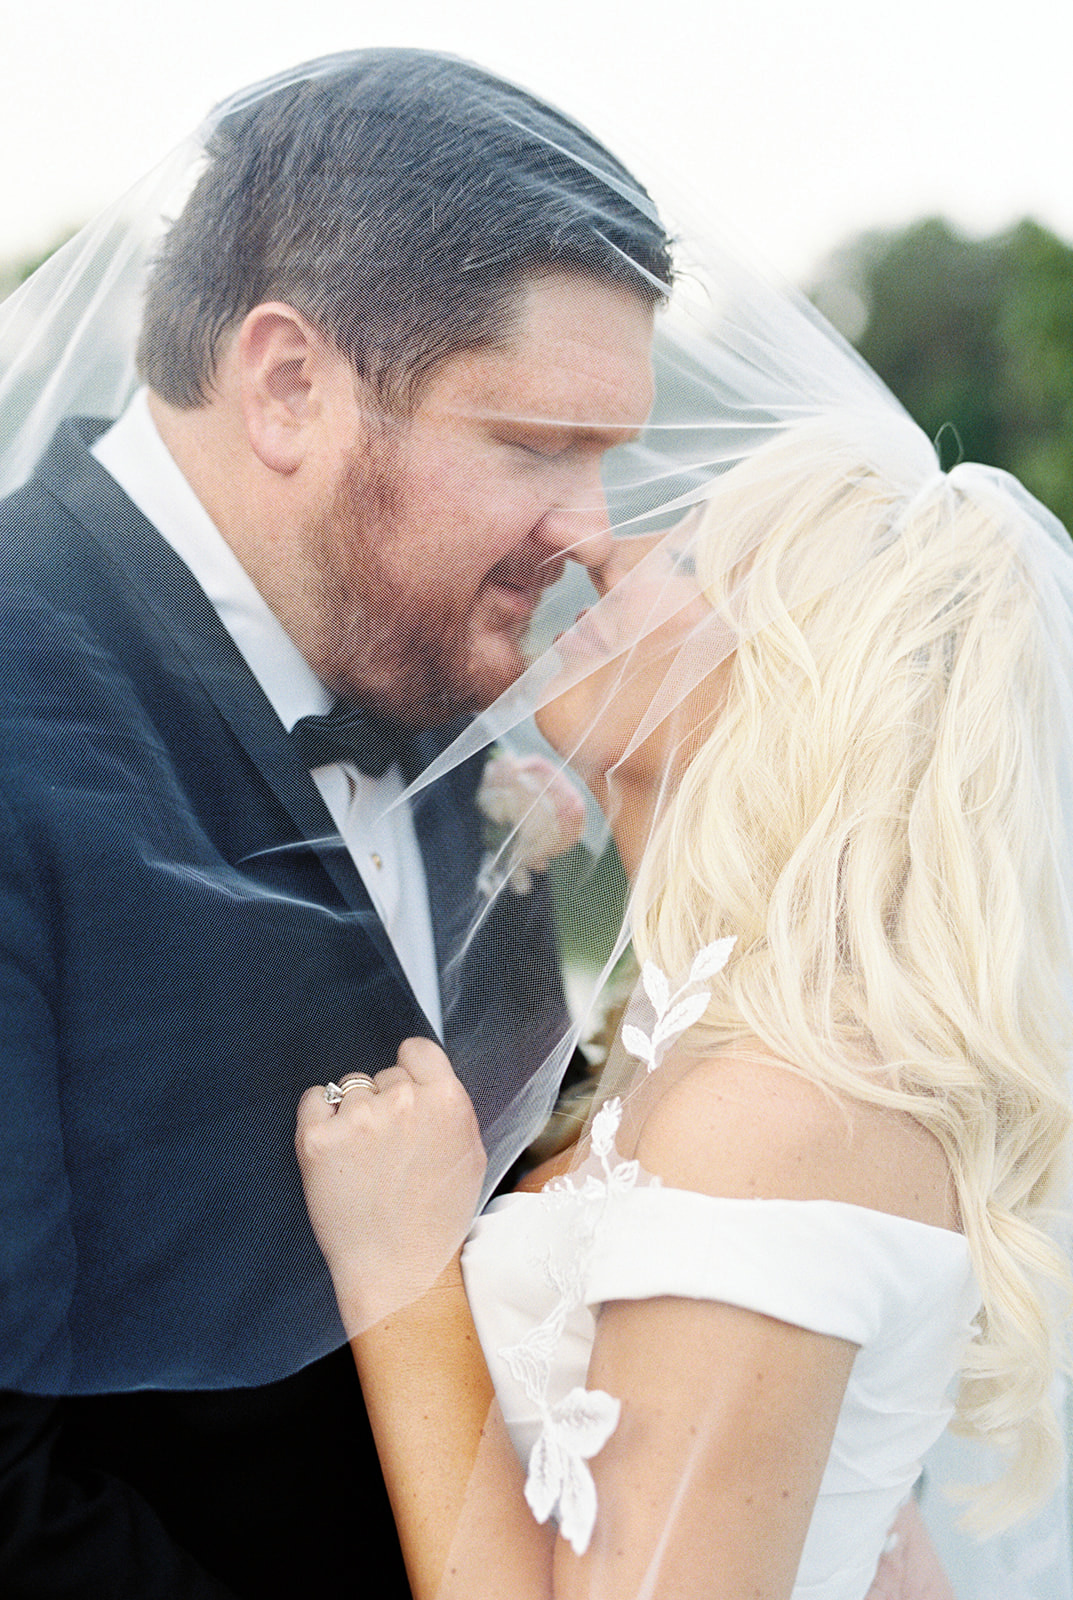 An intimate moment between bride and groom under the veil in Huntsville, Alabama